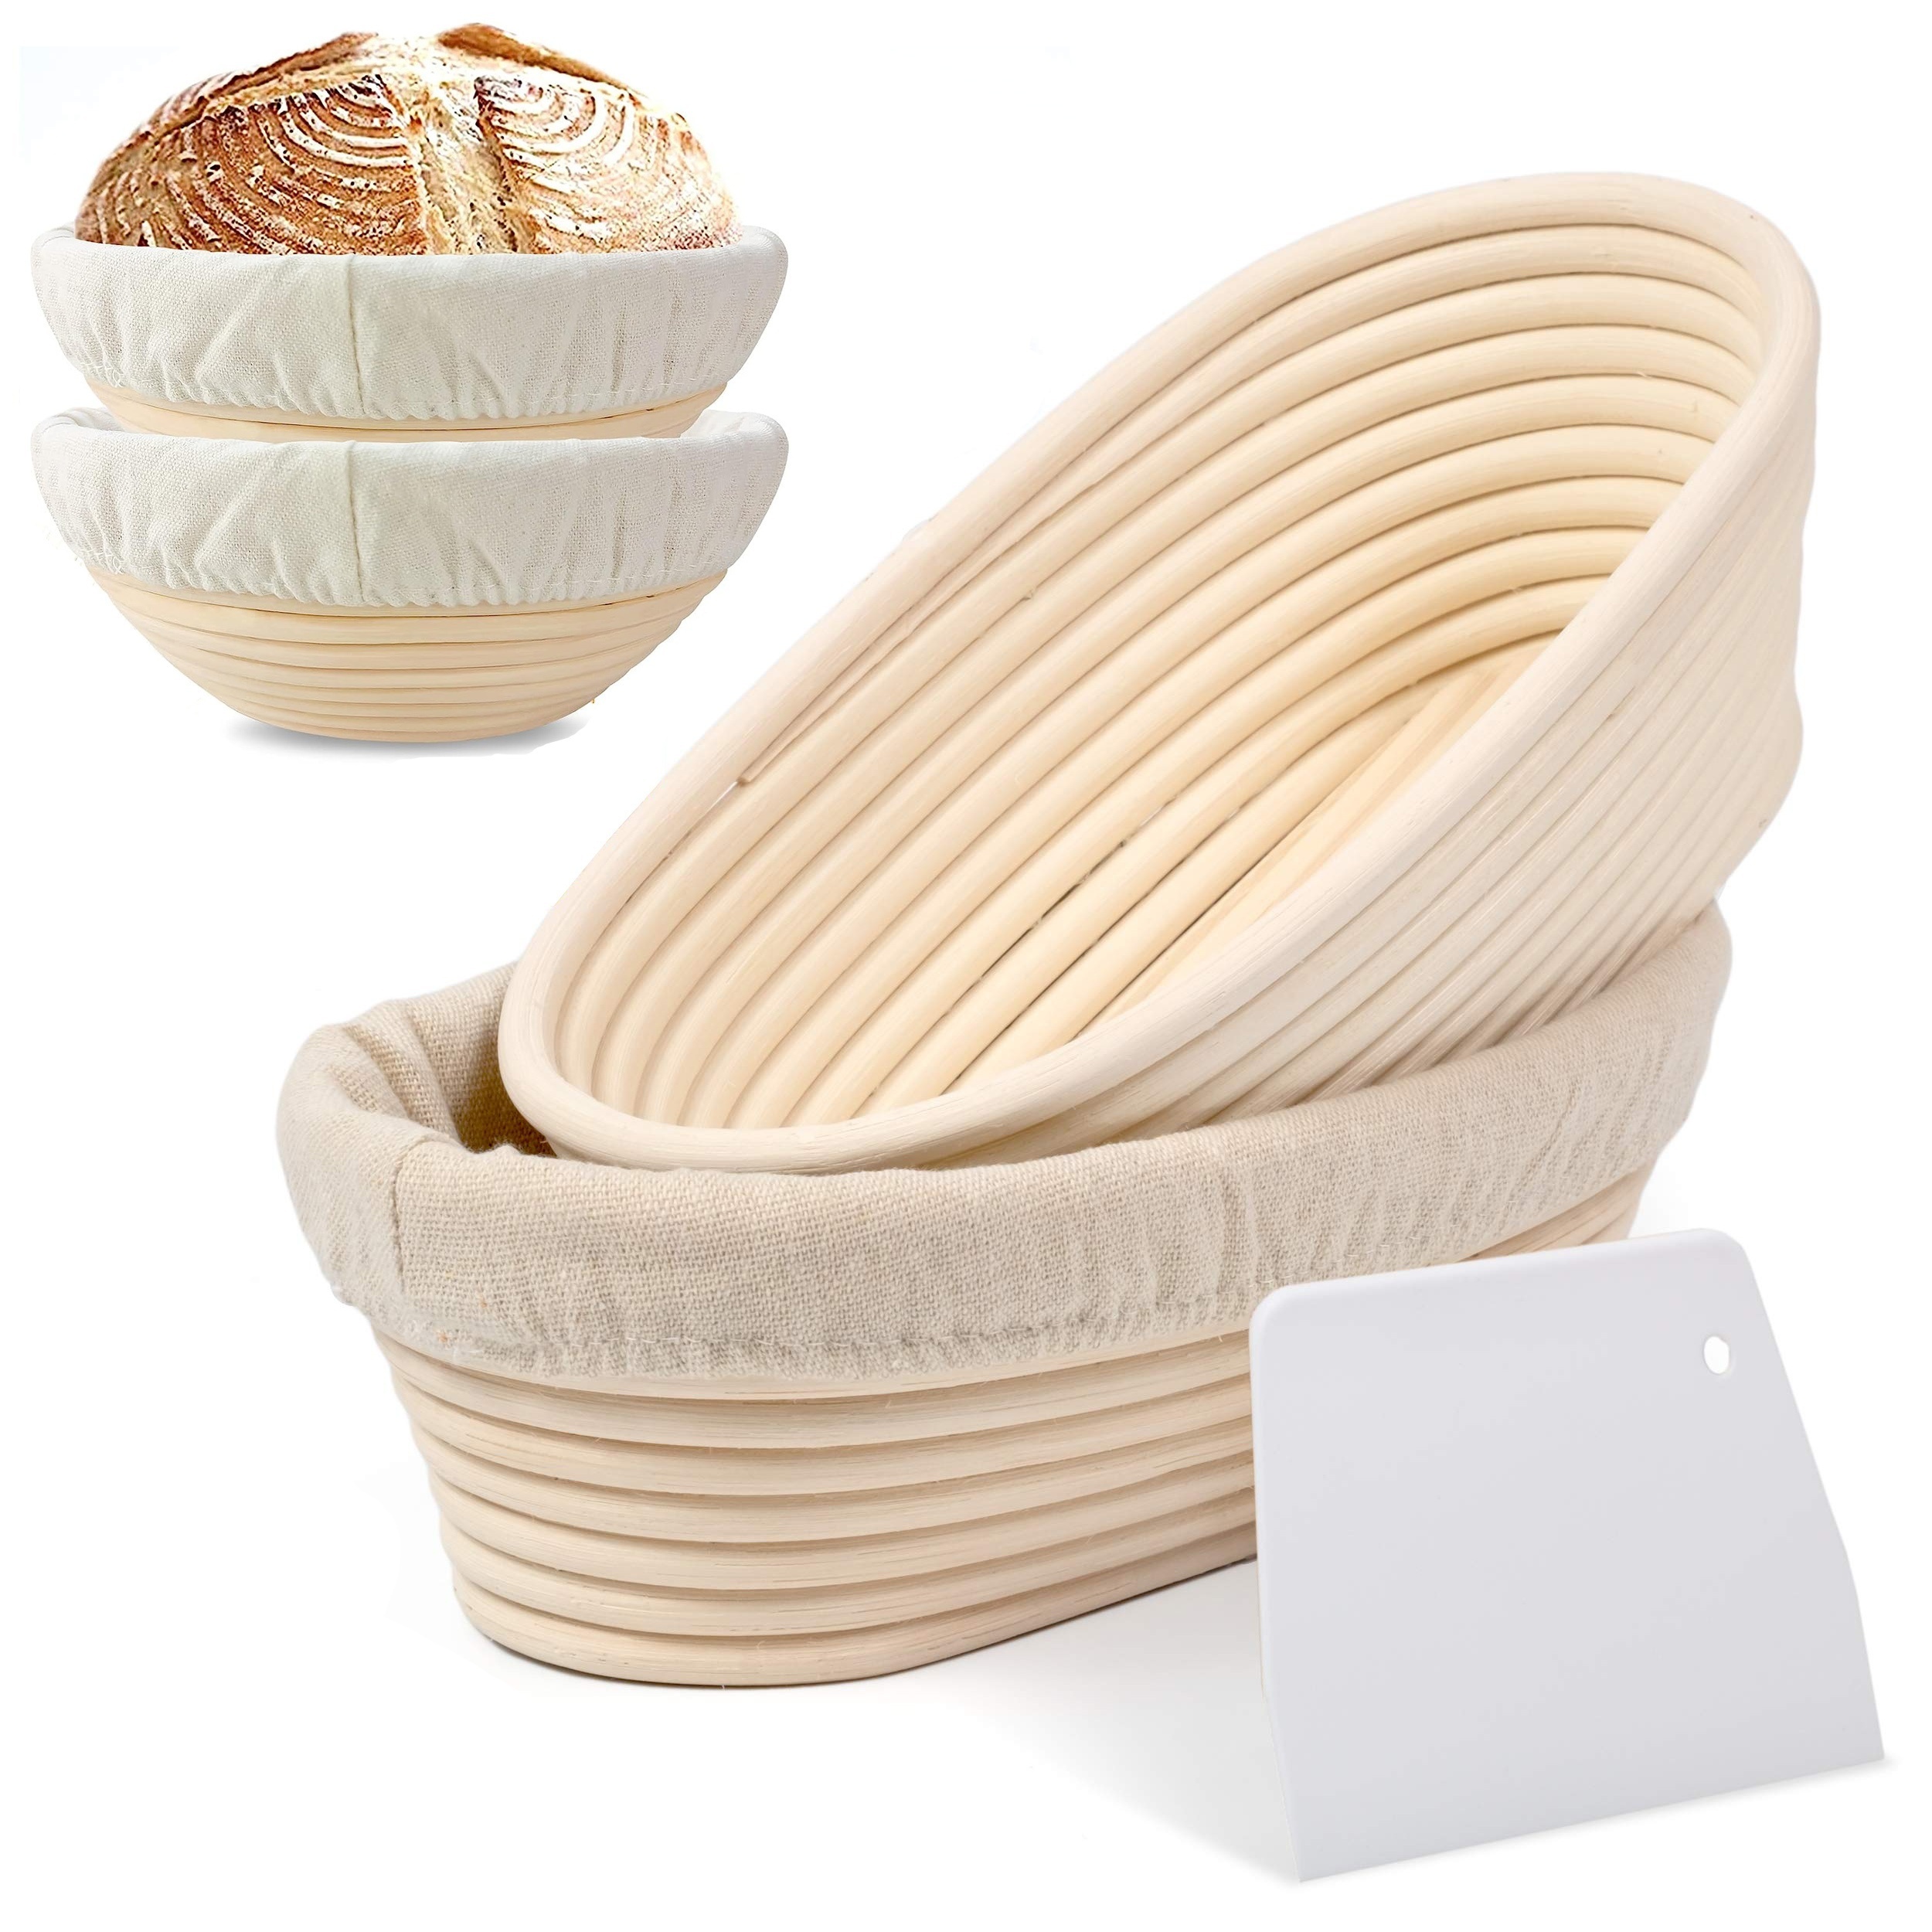  Sourdough Bread Baking Set, 10 Inch Oval & 9 Inch Round  Banneton Bread Proofing Baskets with Linen Liner, Silicone Bread Sling,  Danish Dough Whisk, Dough Scraper Kit, Silicone Brush & Silicone